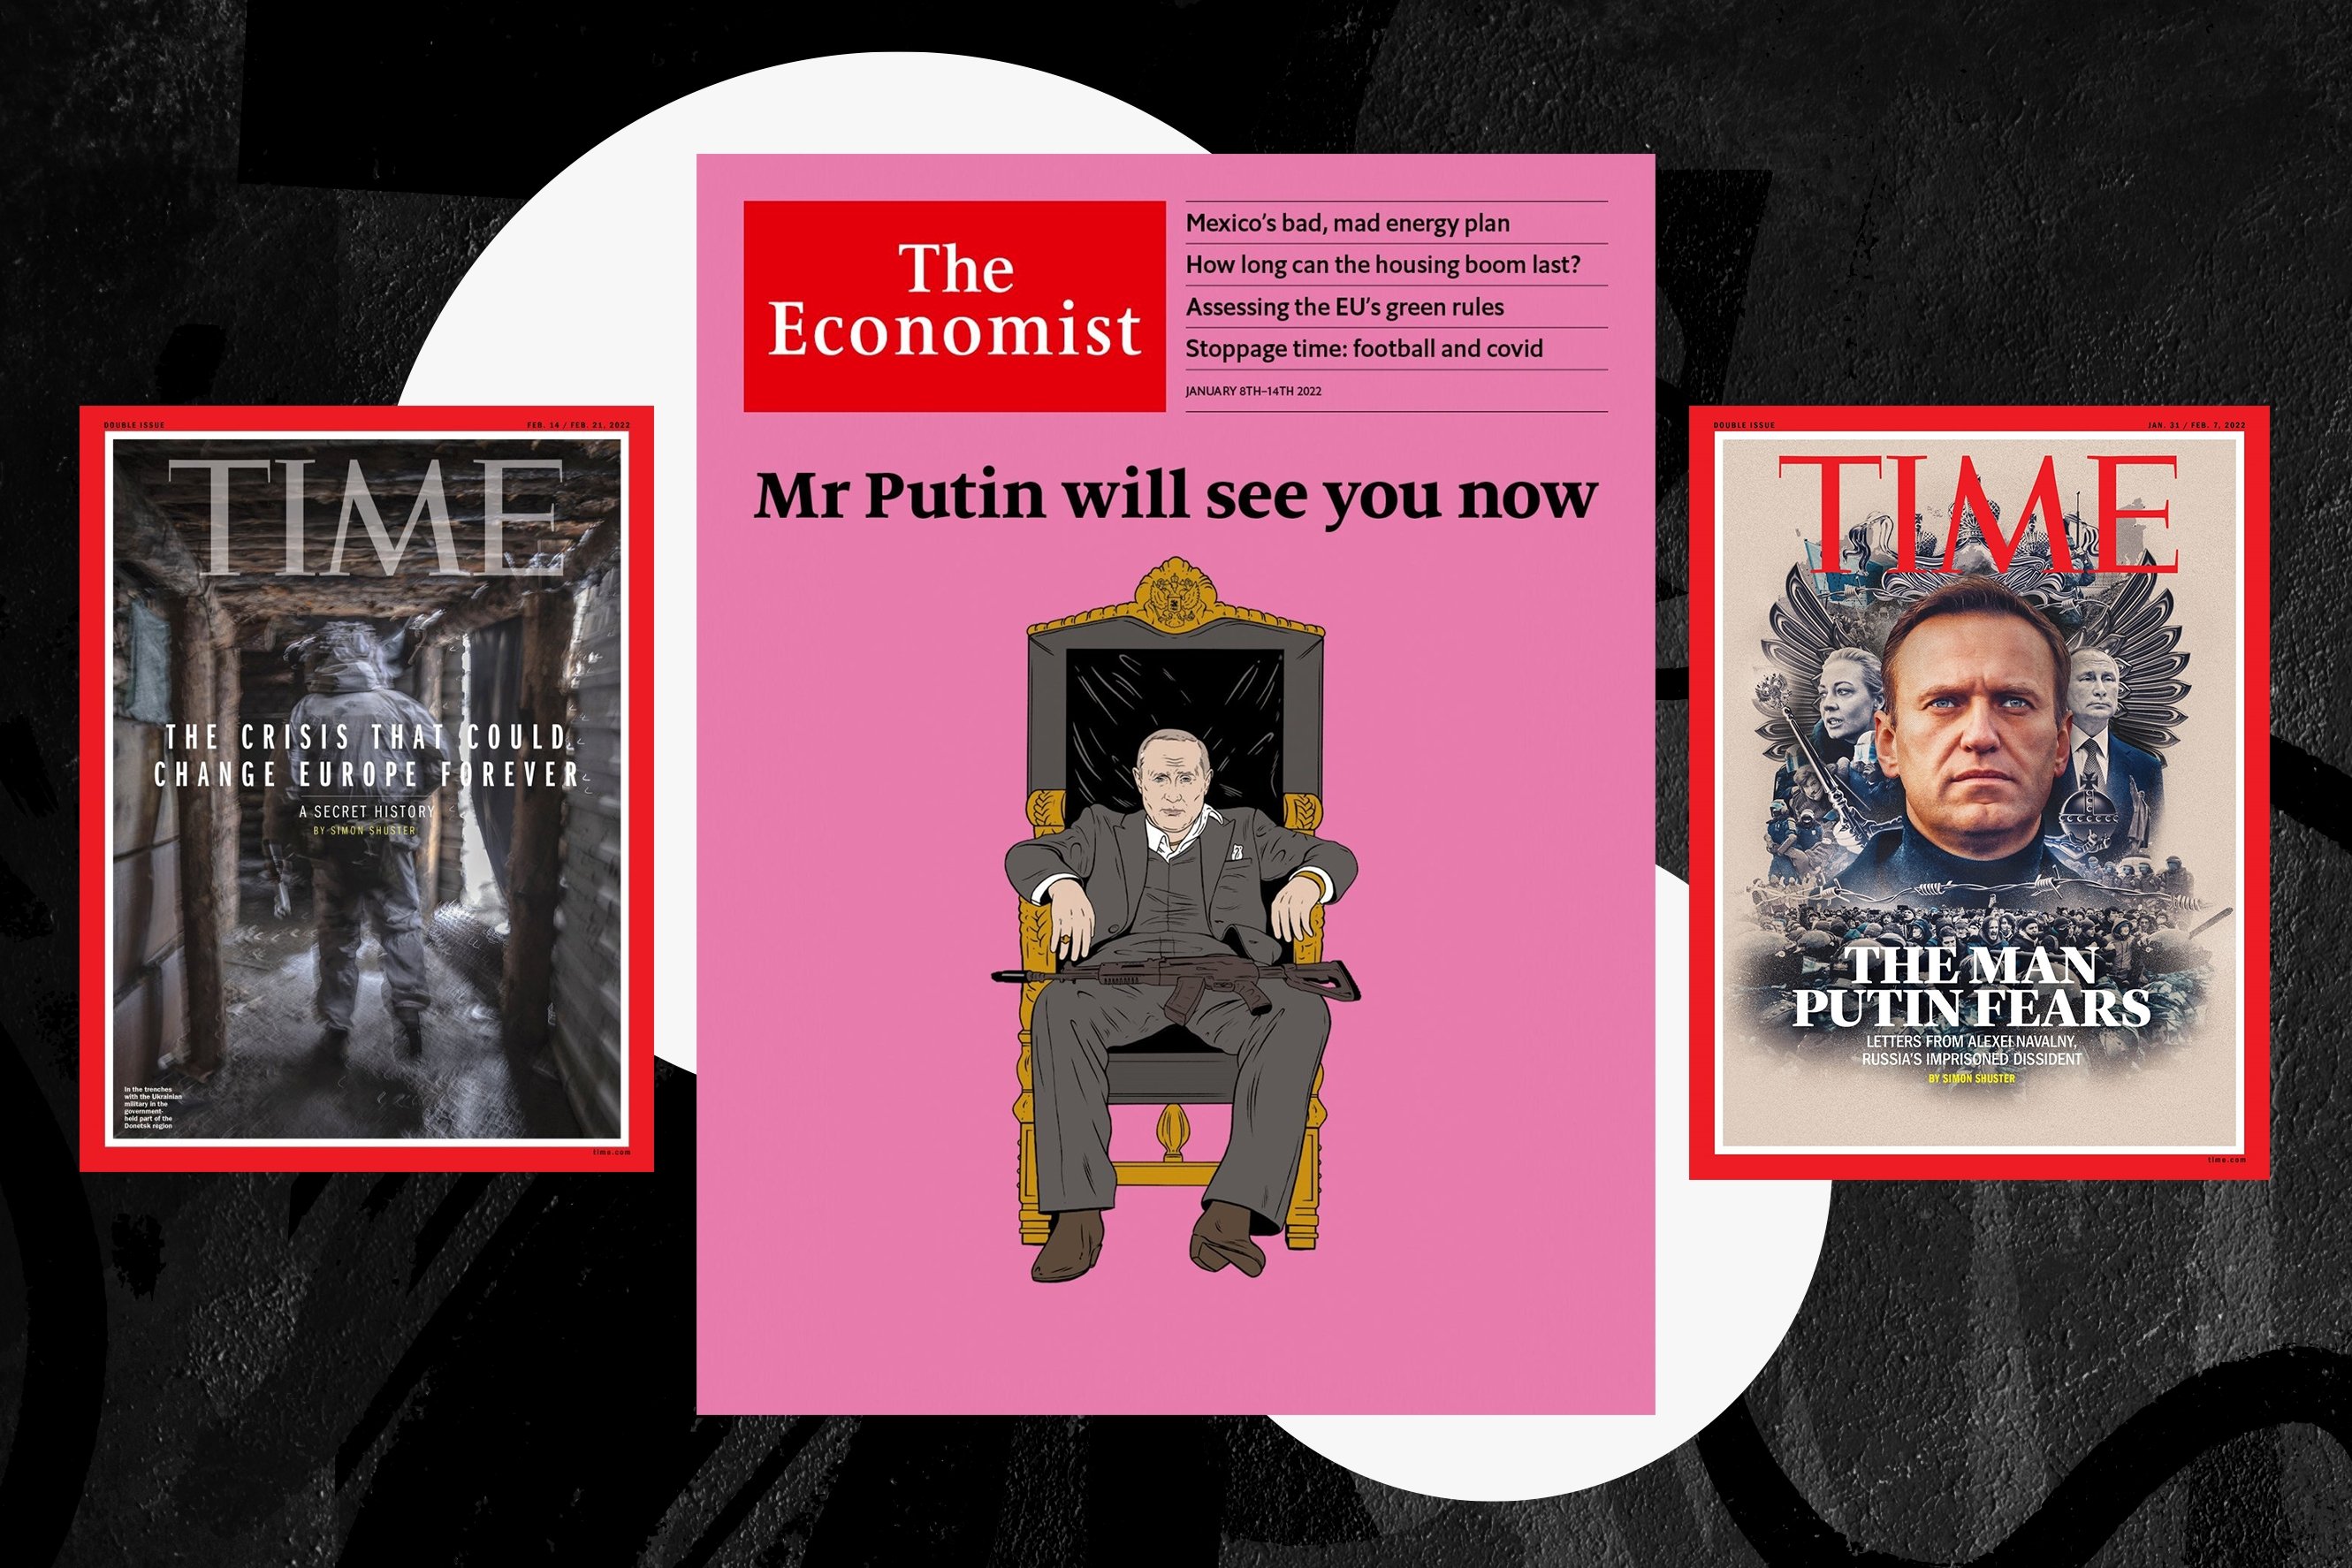 From left to right, the covers of Time's Feb. 14-21 edition, The Economist’s Jan. 8-14 edition and Time's Jan. 31-Feb. 7 edition. (Edited by Büşra Öztürk)